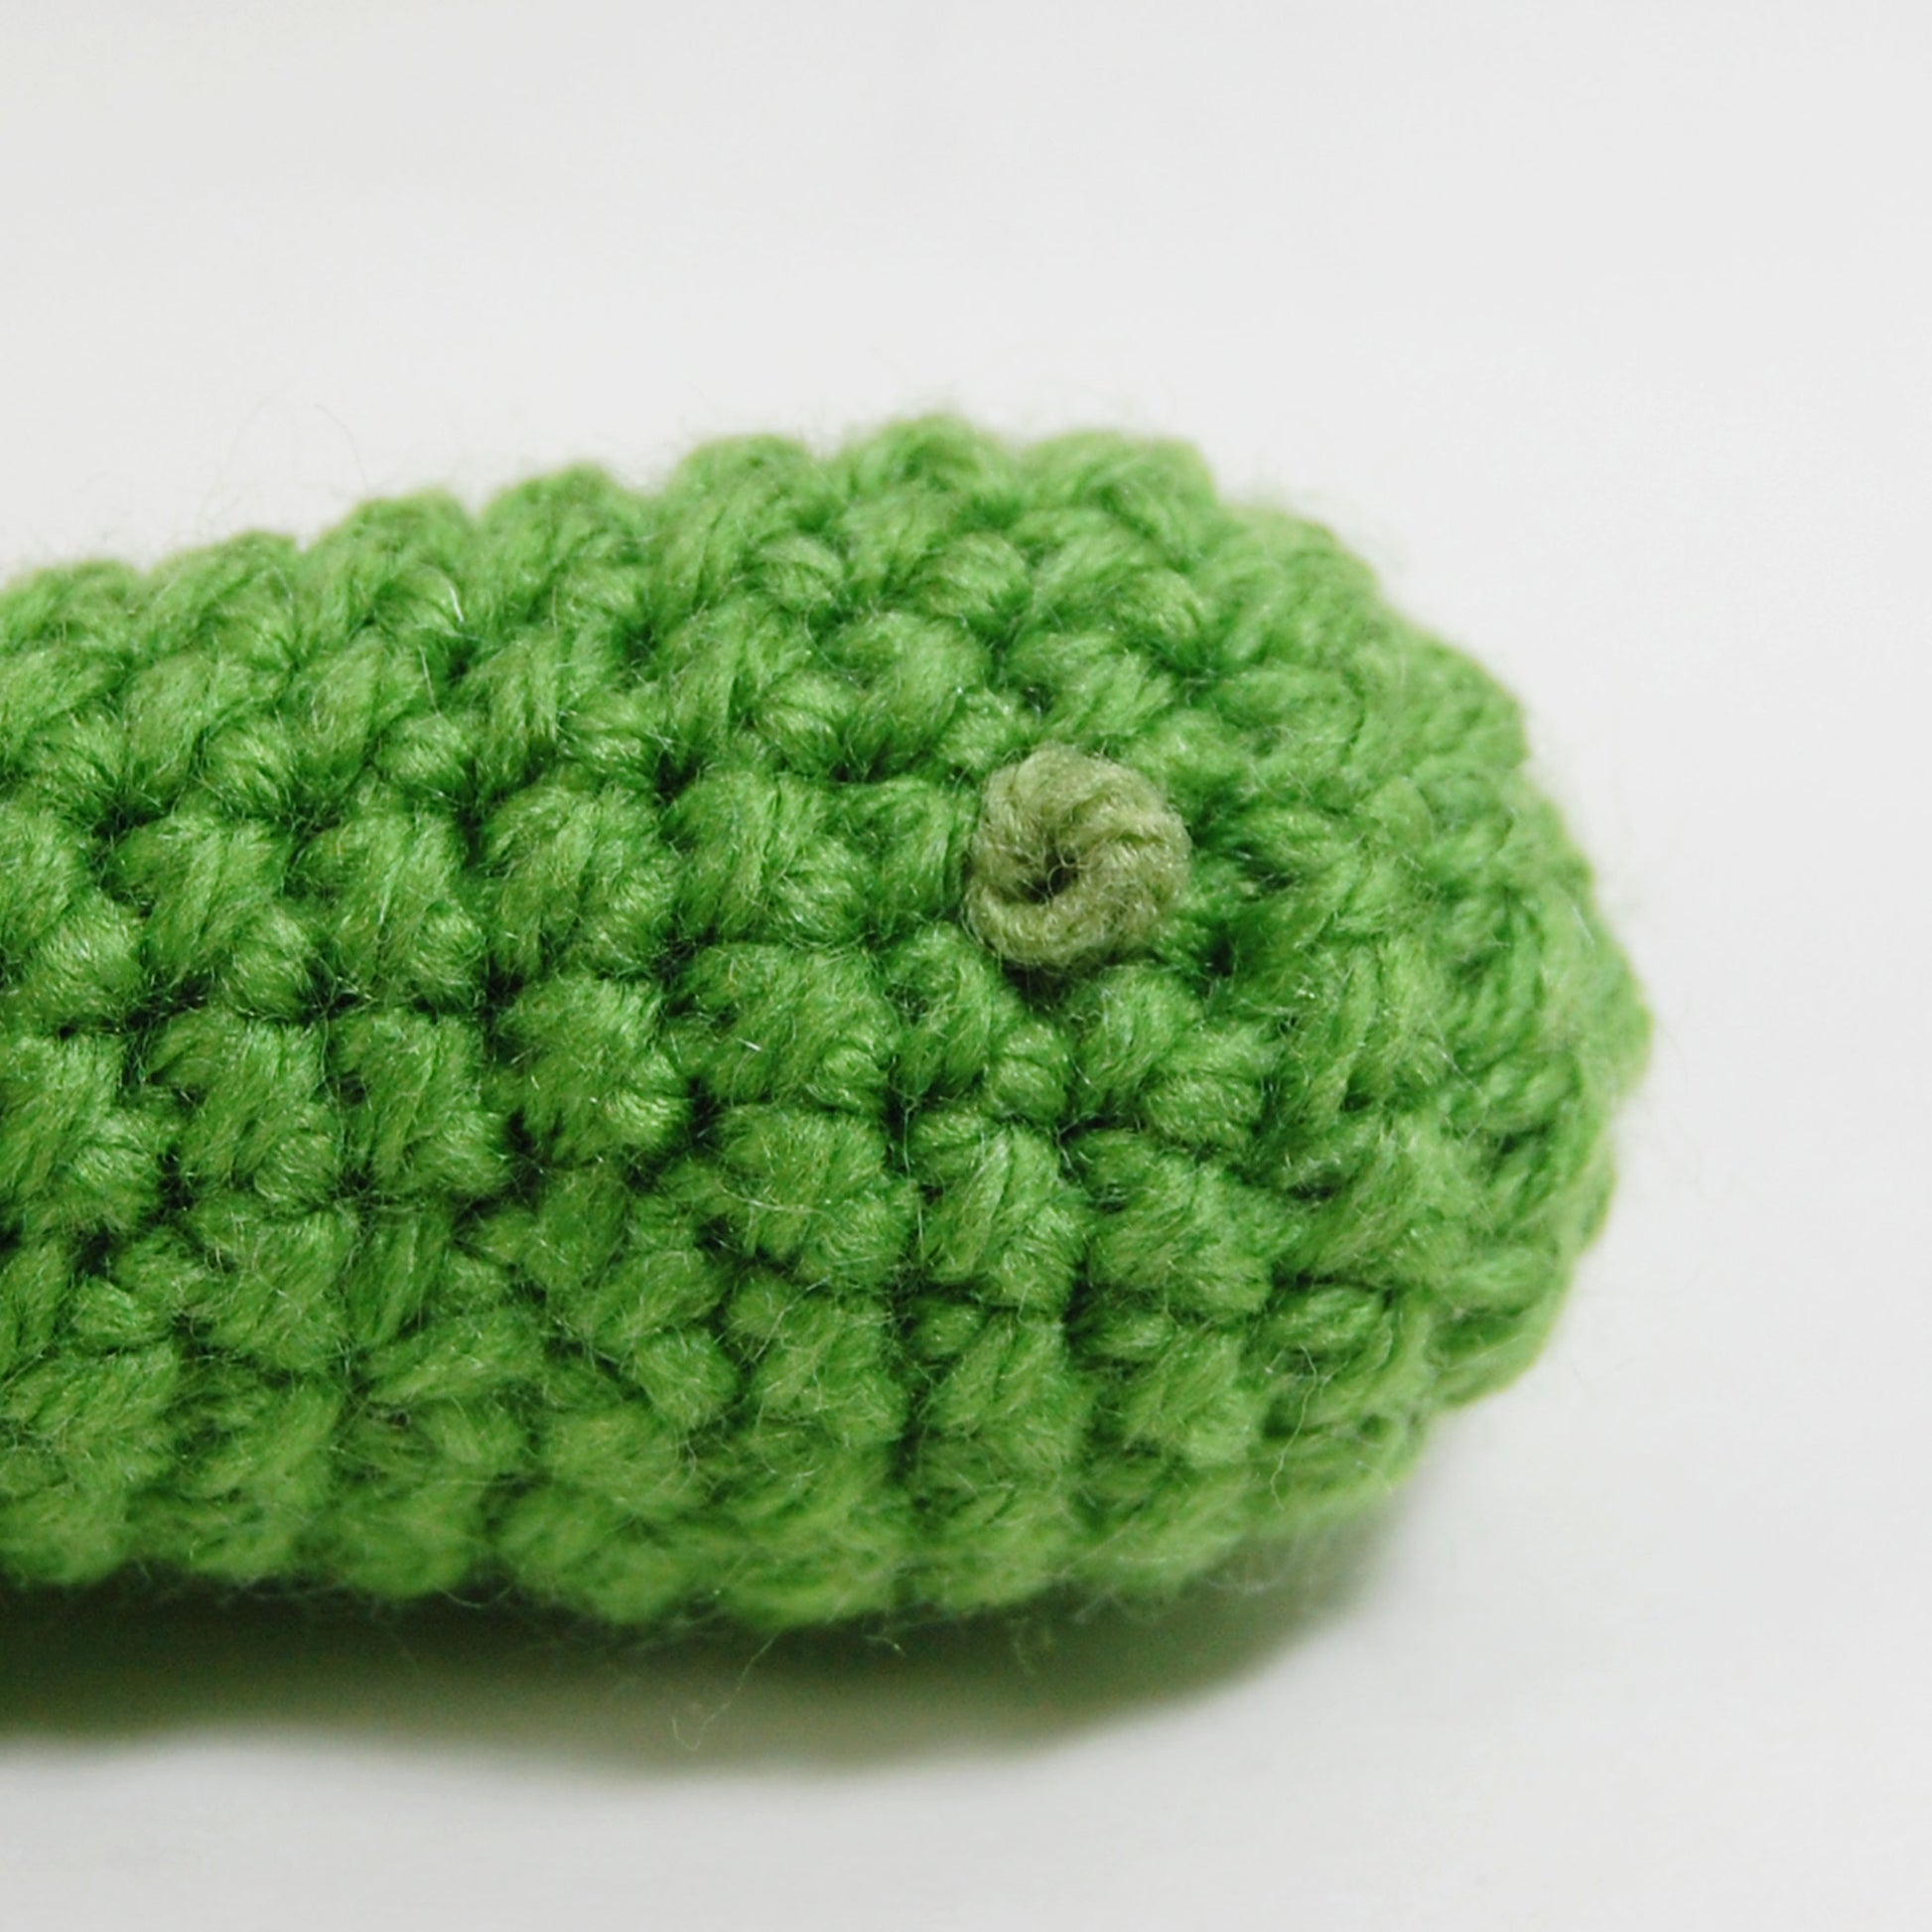 PATTERN ONLY, Easy Pickle Crochet Pattern, Instant DOWNLOAD 